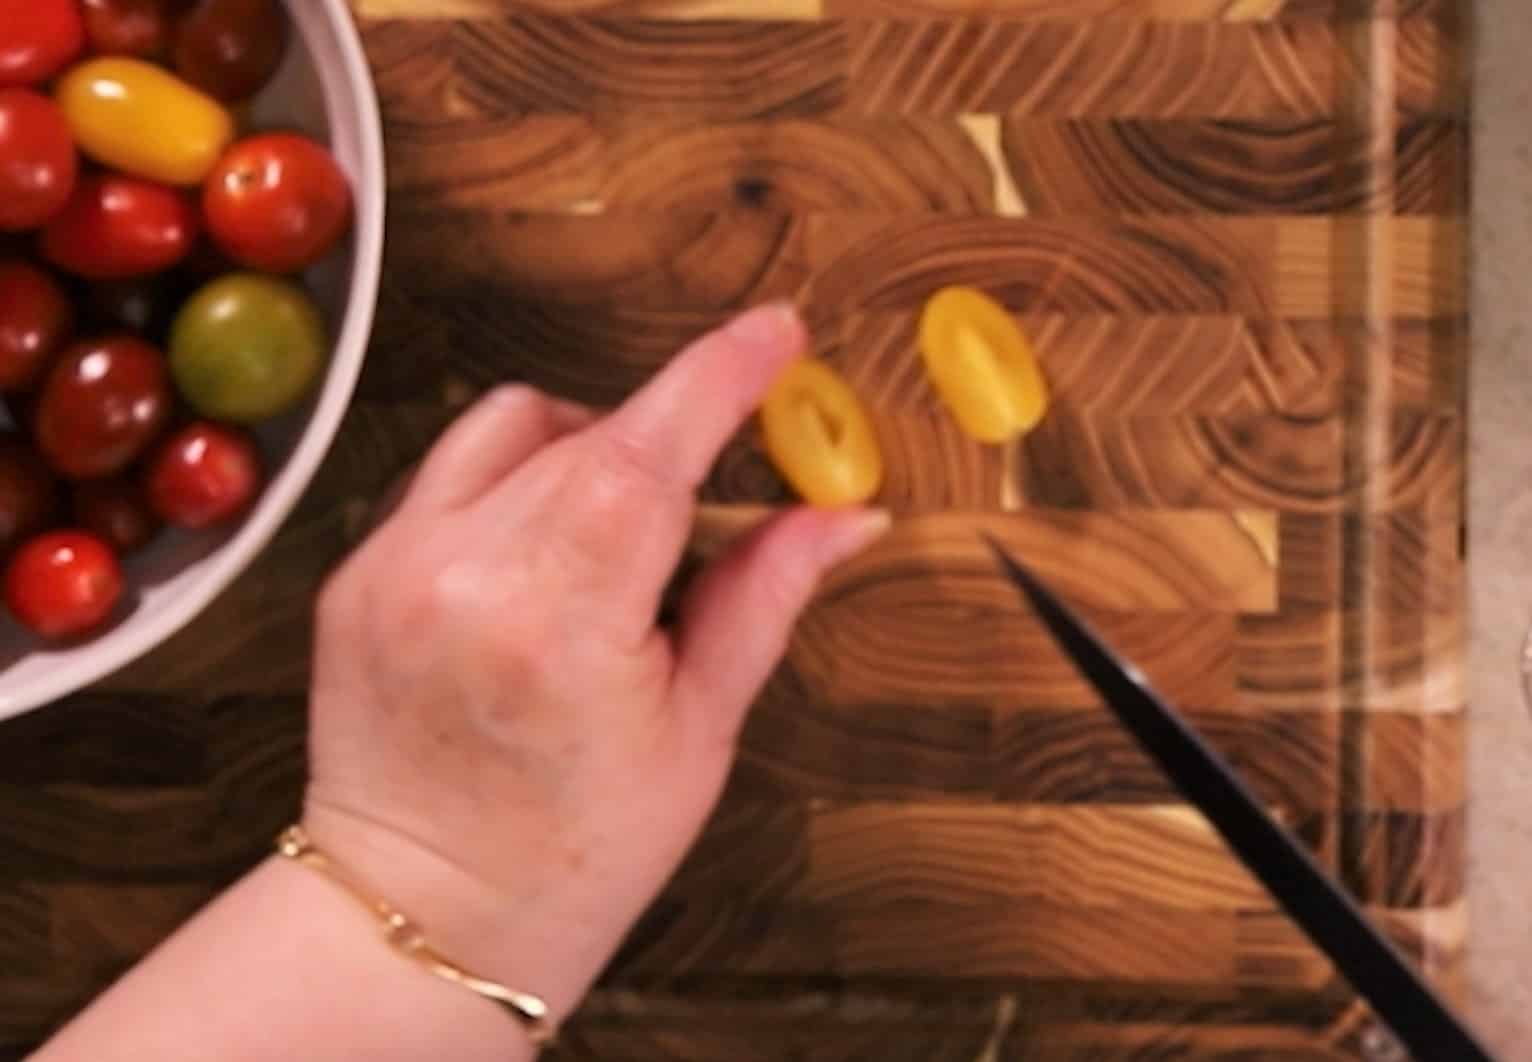 Jill slicing tomatoes horizontally on a wooden cutting board